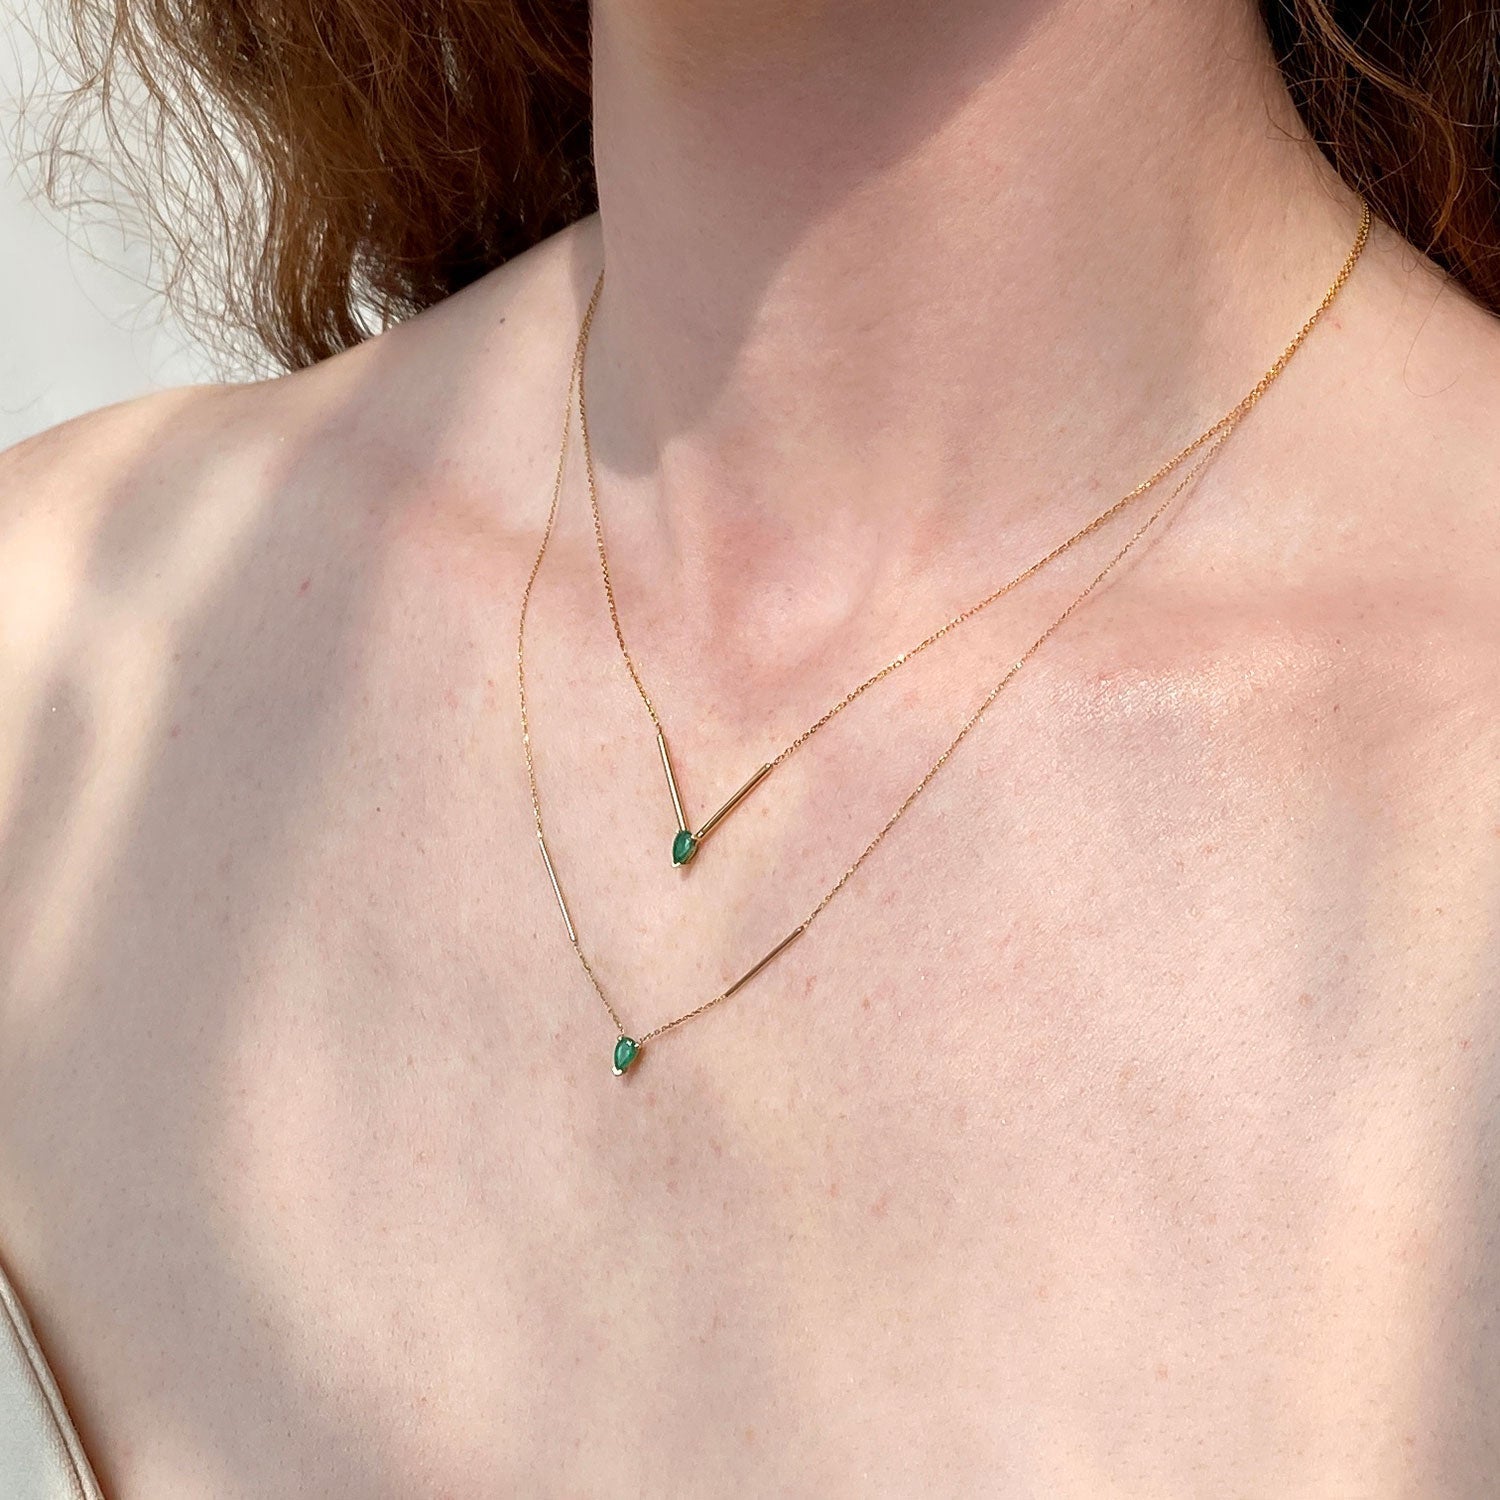 Deconstructed Bar Gold Necklace